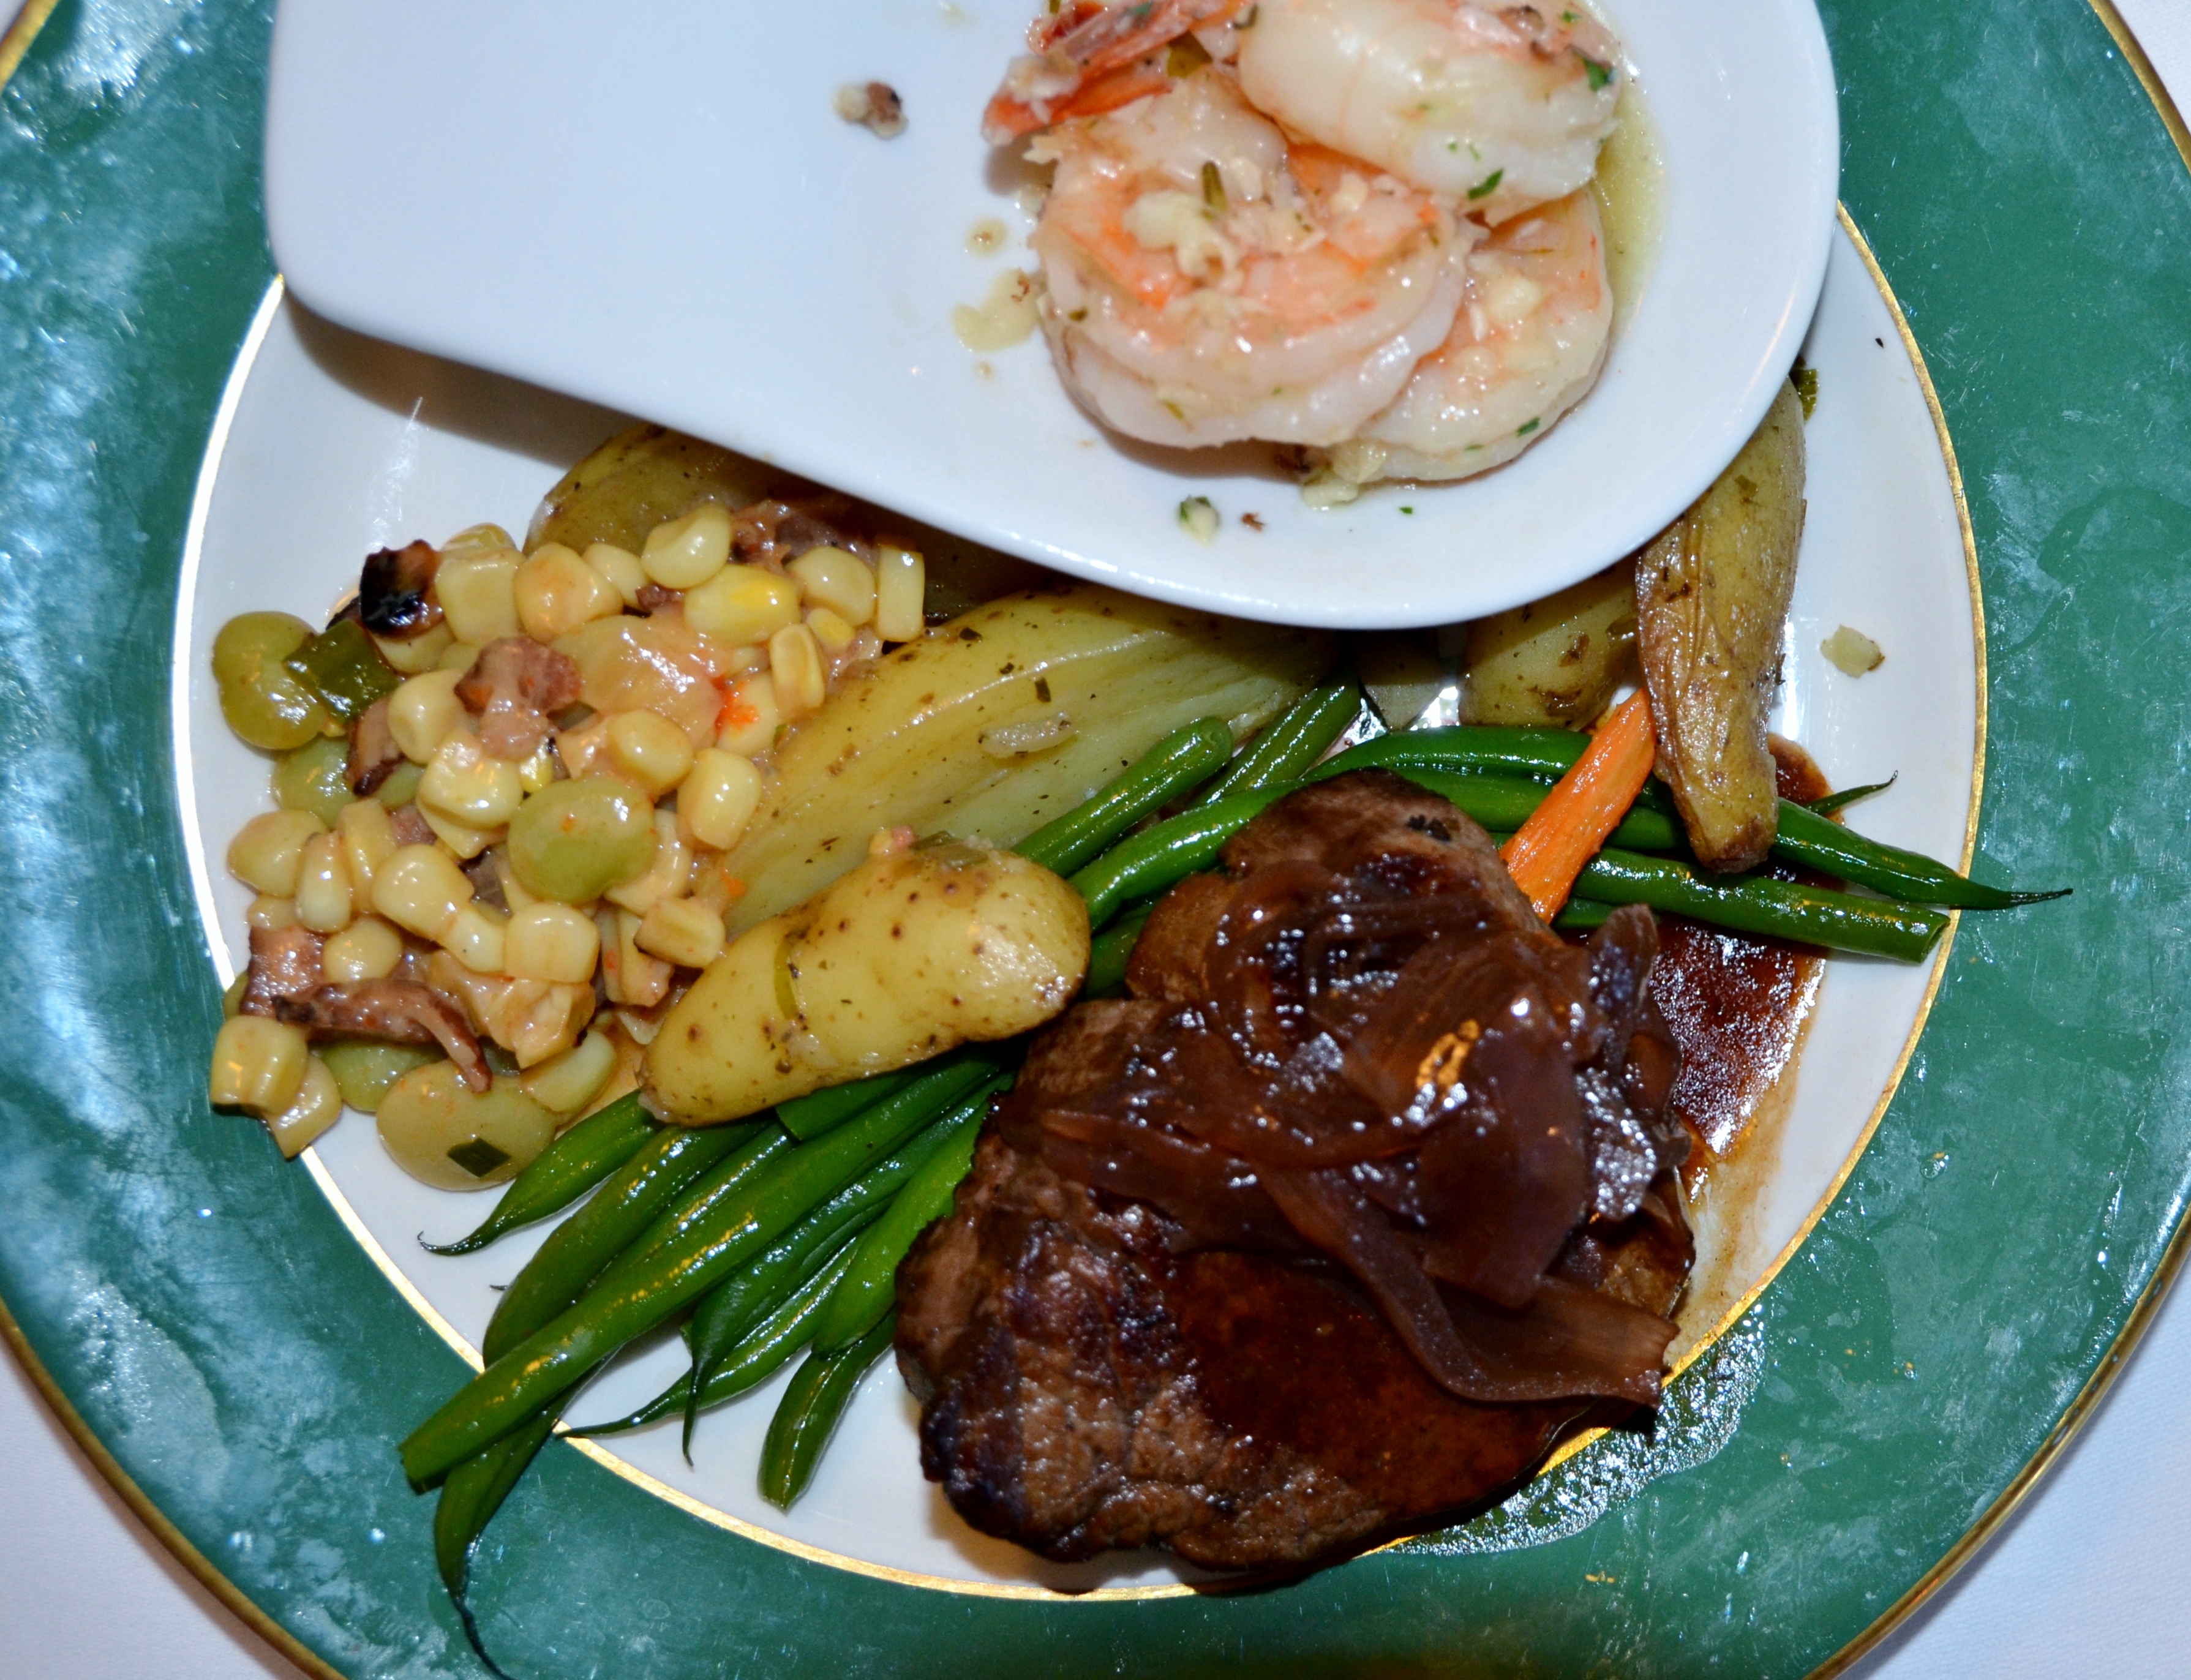 Filet Mignon and Shrimp at the Grand Hotel on Mackinac Island